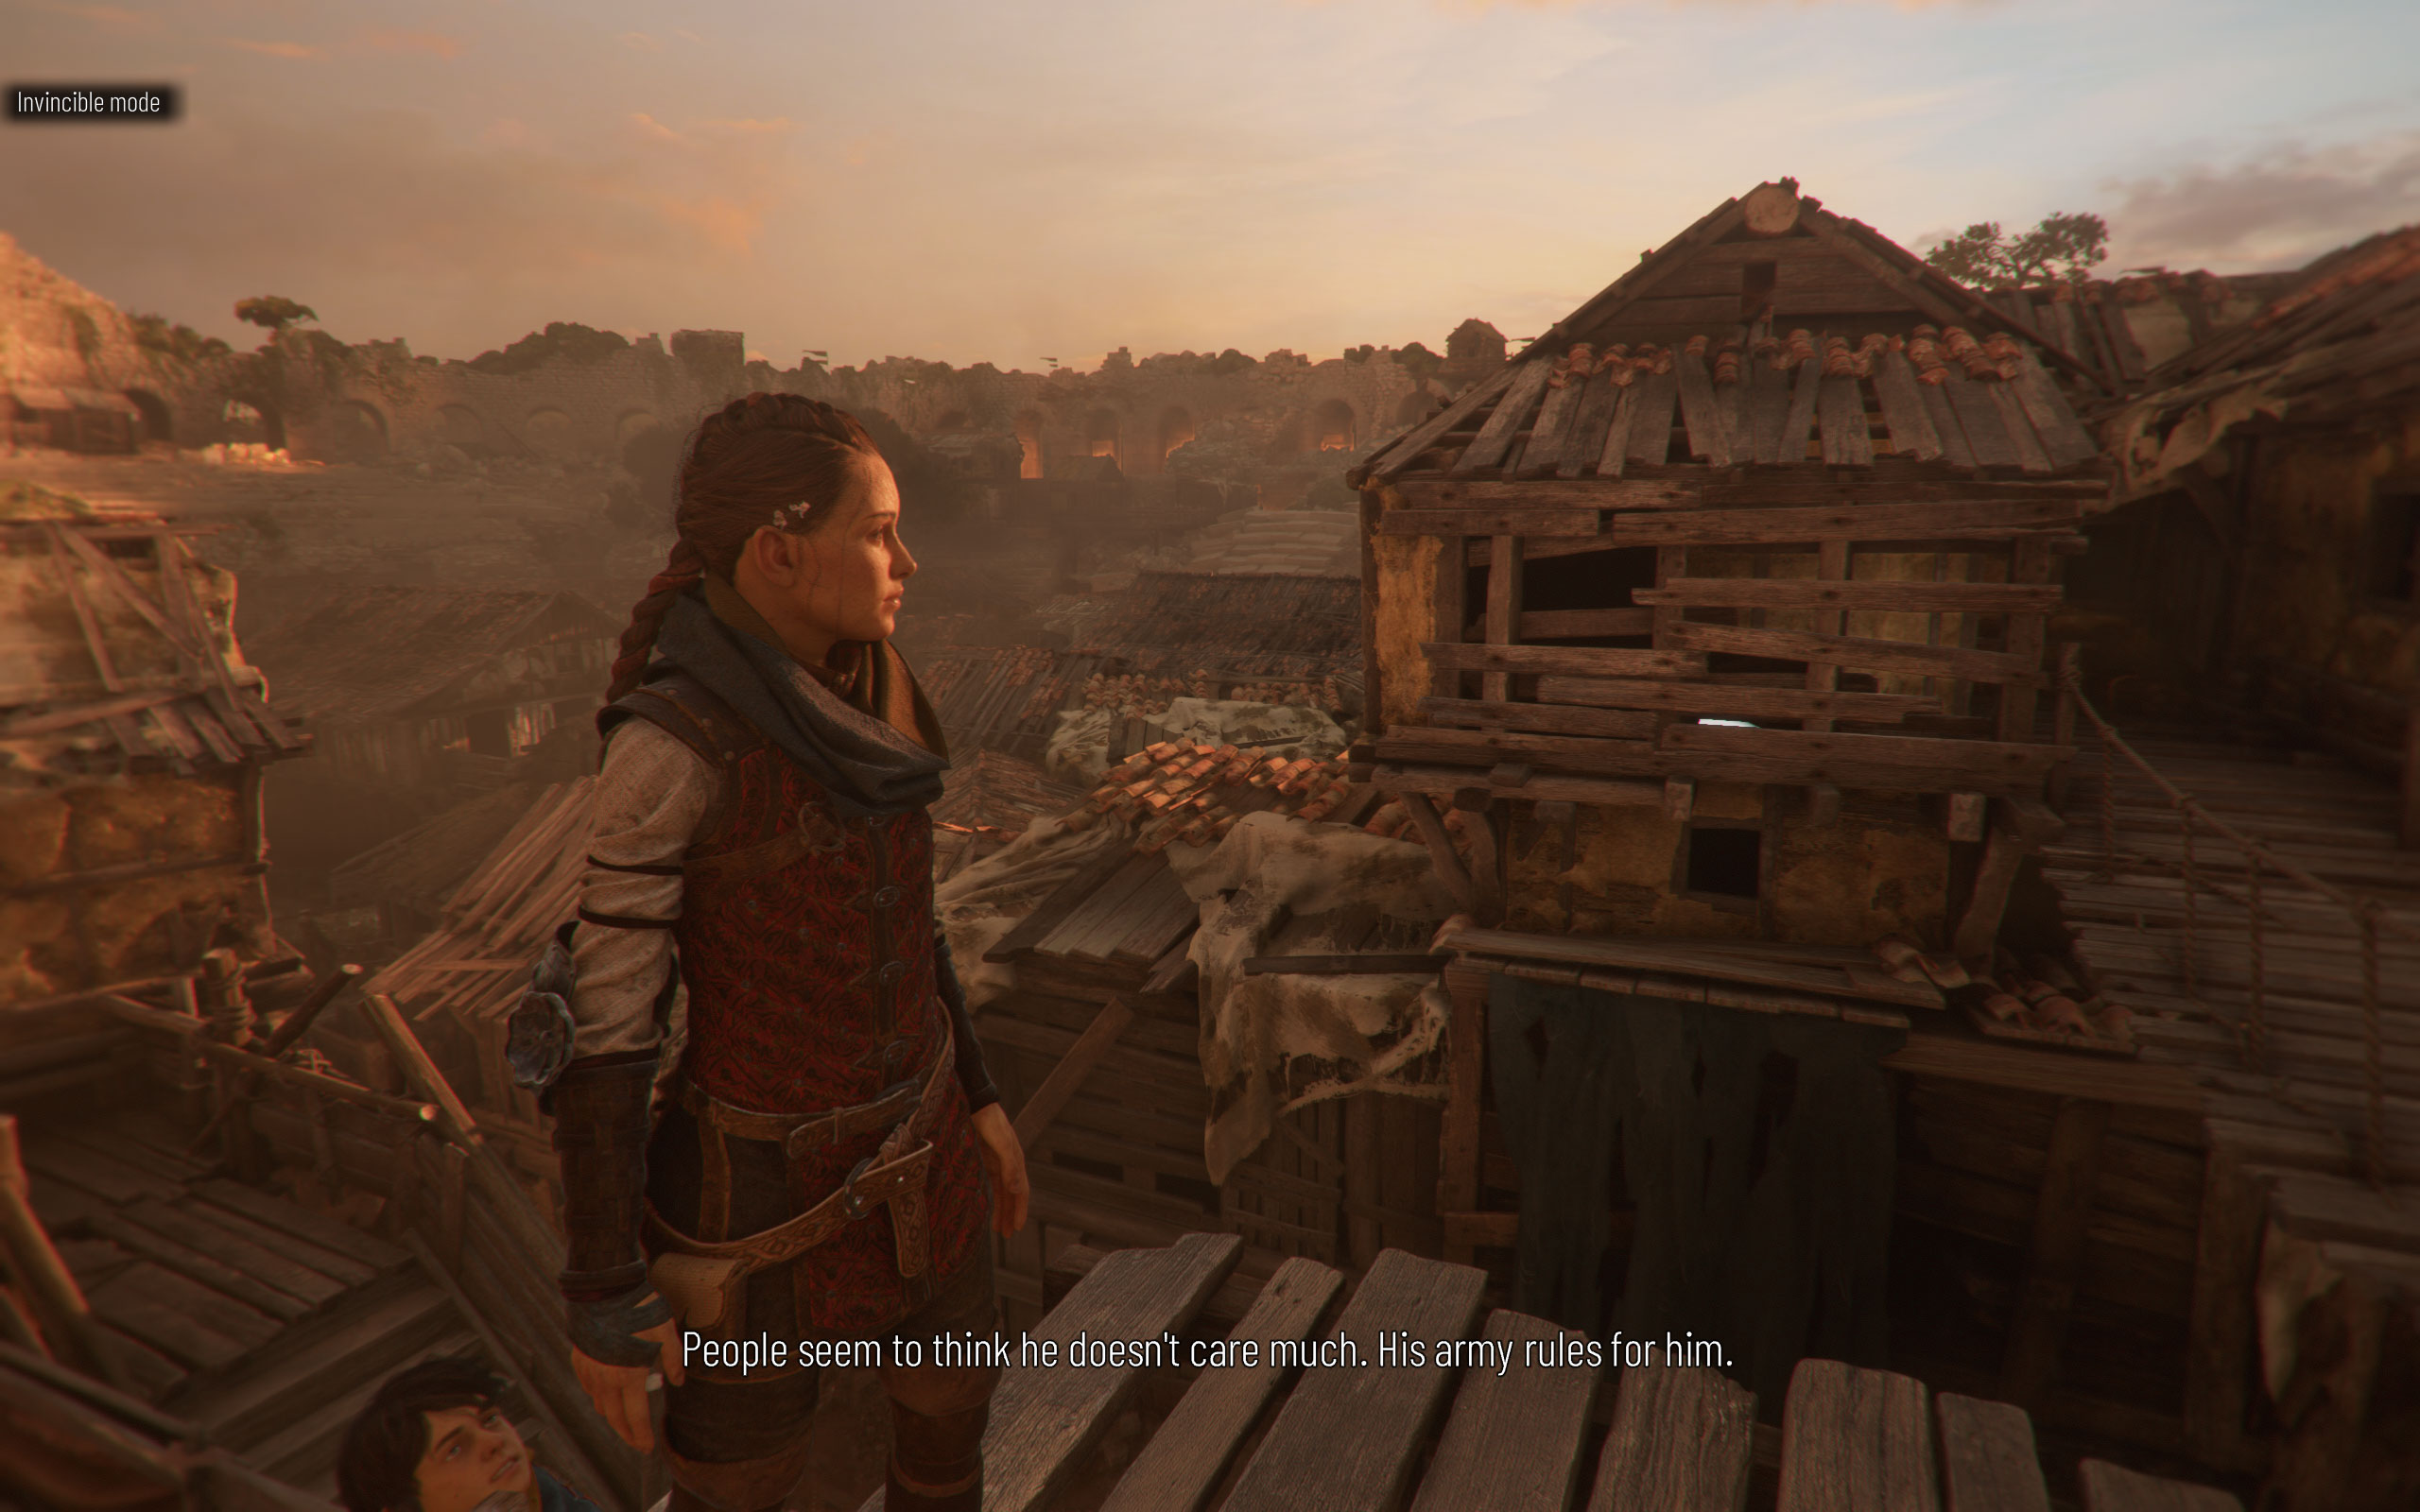 A review of Plague Tale Requiem on PC — Rigged for Epic